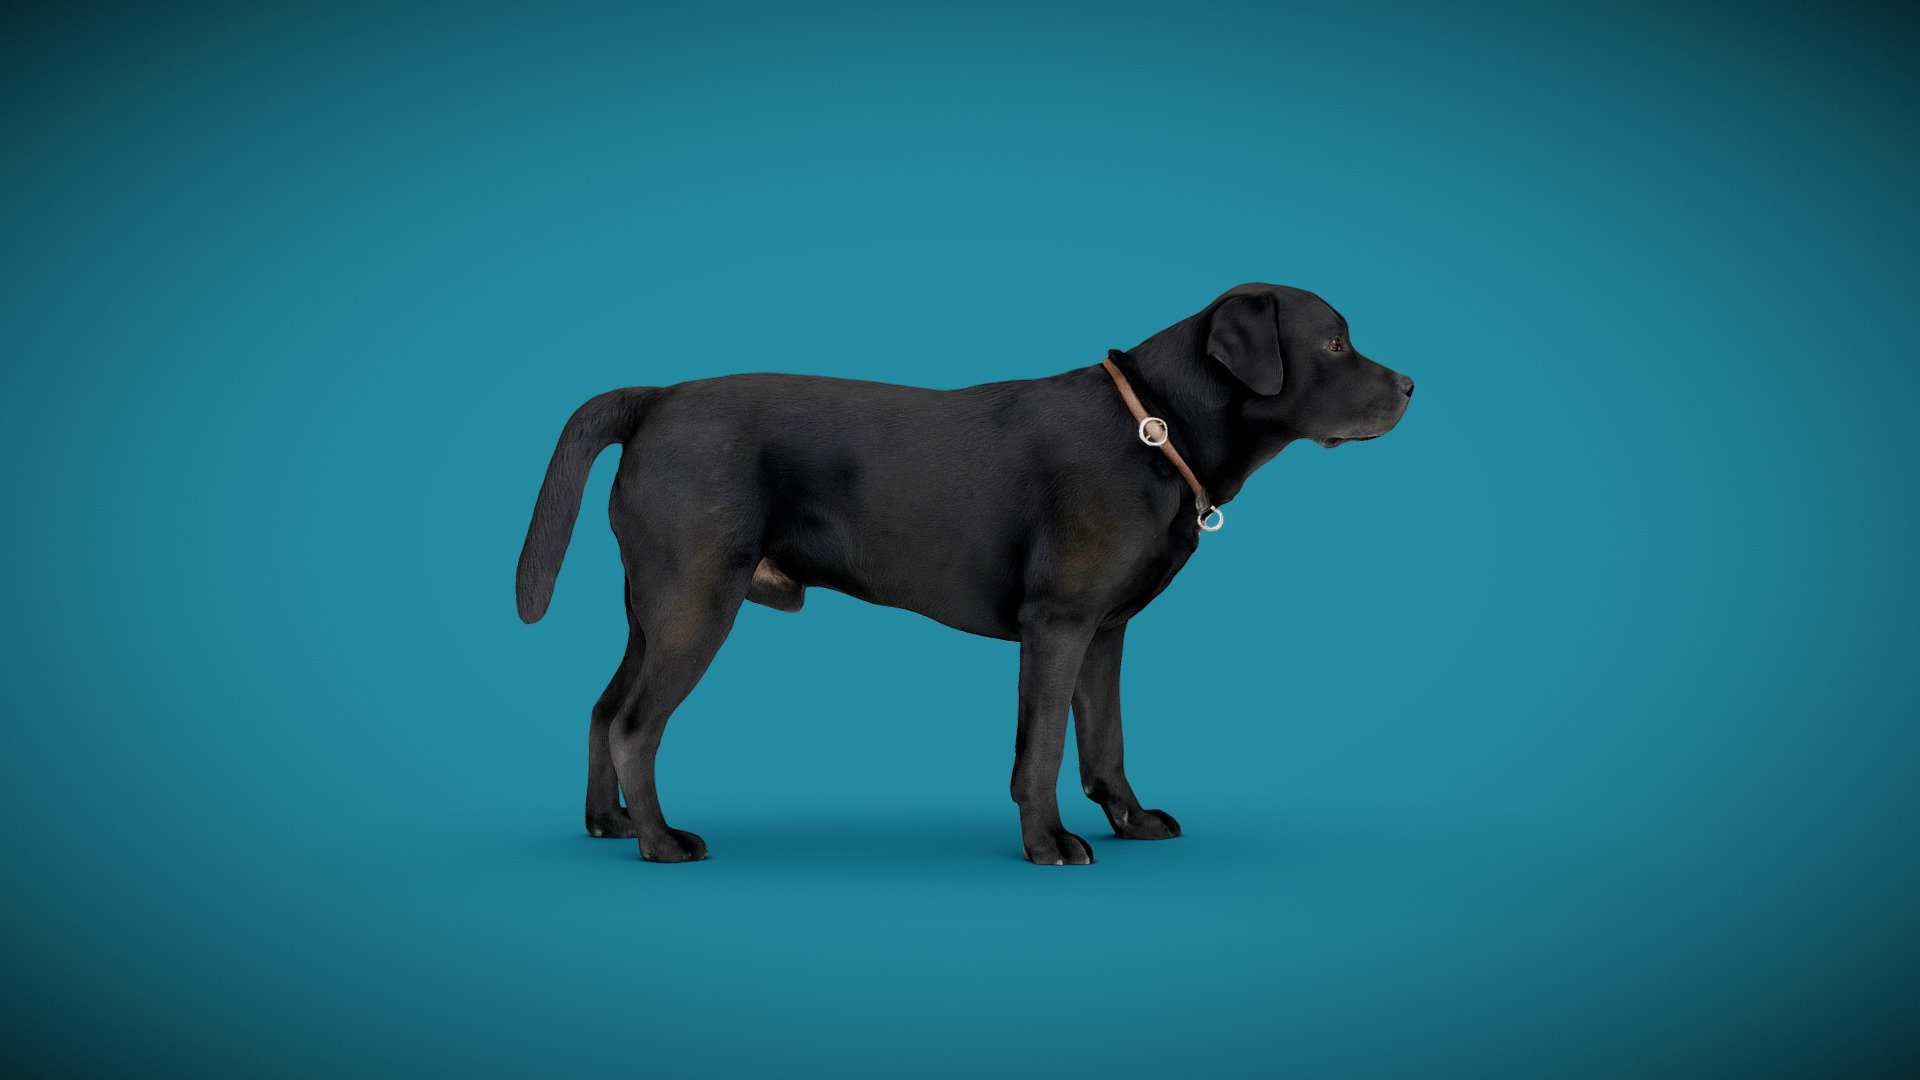 3d-dog-scan using photogrammetry technique // more poses and packages avaiable*




3D-Model triangulated

4K DiffuseColorTexture

real scale

watertight

3d-ScanService: https://www.optimission.de

*
https://skfb.ly/o8q9P
https://skfb.ly/o8q9Q
https://skfb.ly/o8q9S - DOG A - 6of6 - Buy Royalty Free 3D model by Frank.Zwick (@Frank_Zwick) 3d model